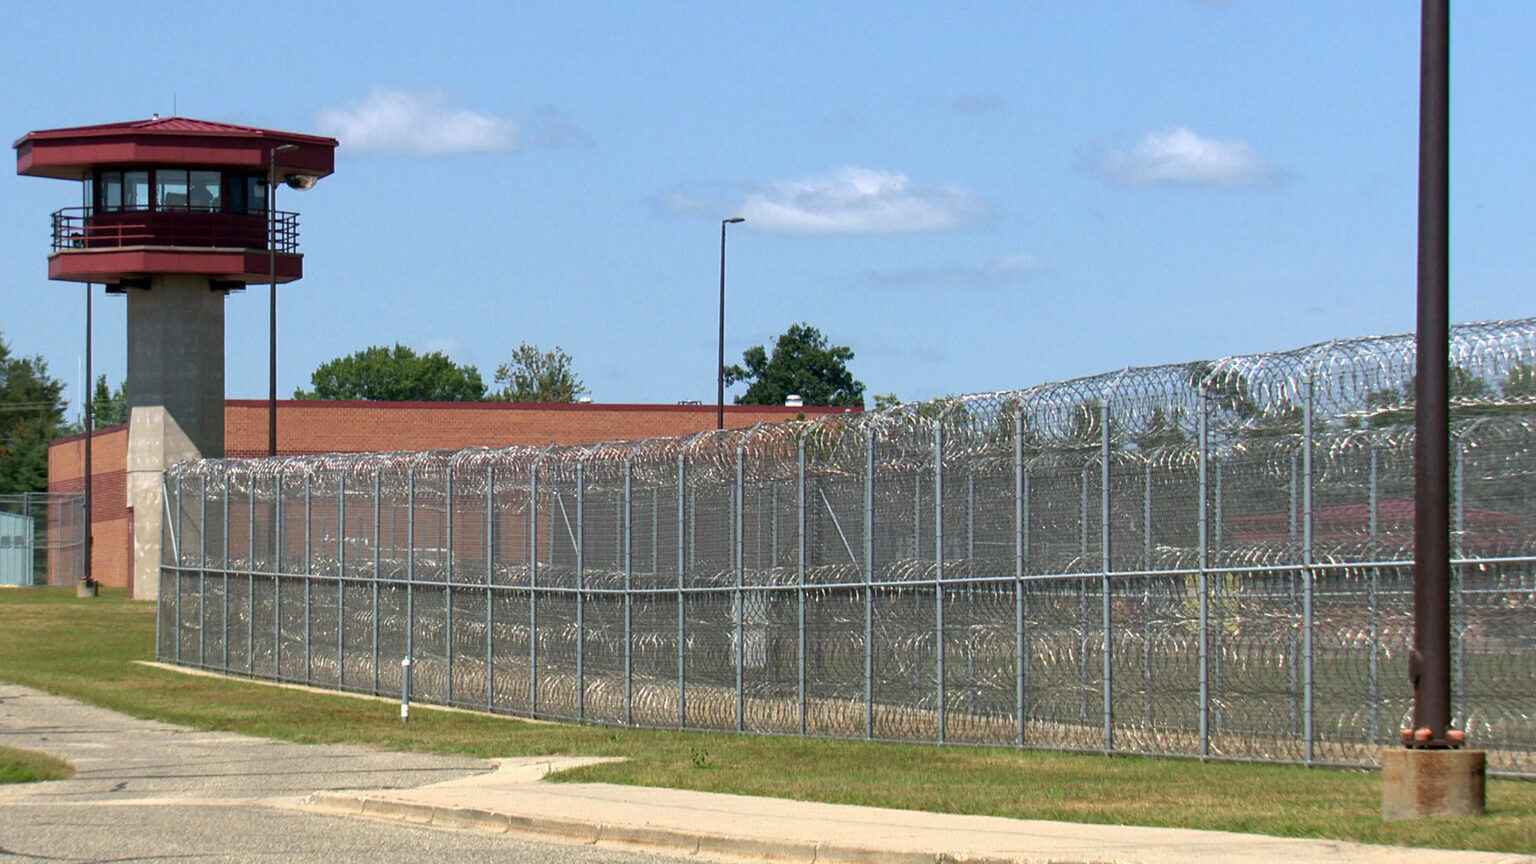 A chain-link fence ringed and topped with razor wire runs along the side of a parking lot, with a light pole in the foreground, and a prison guard tower, brick building, more lights and trees in the background, under a partly cloudy sky.